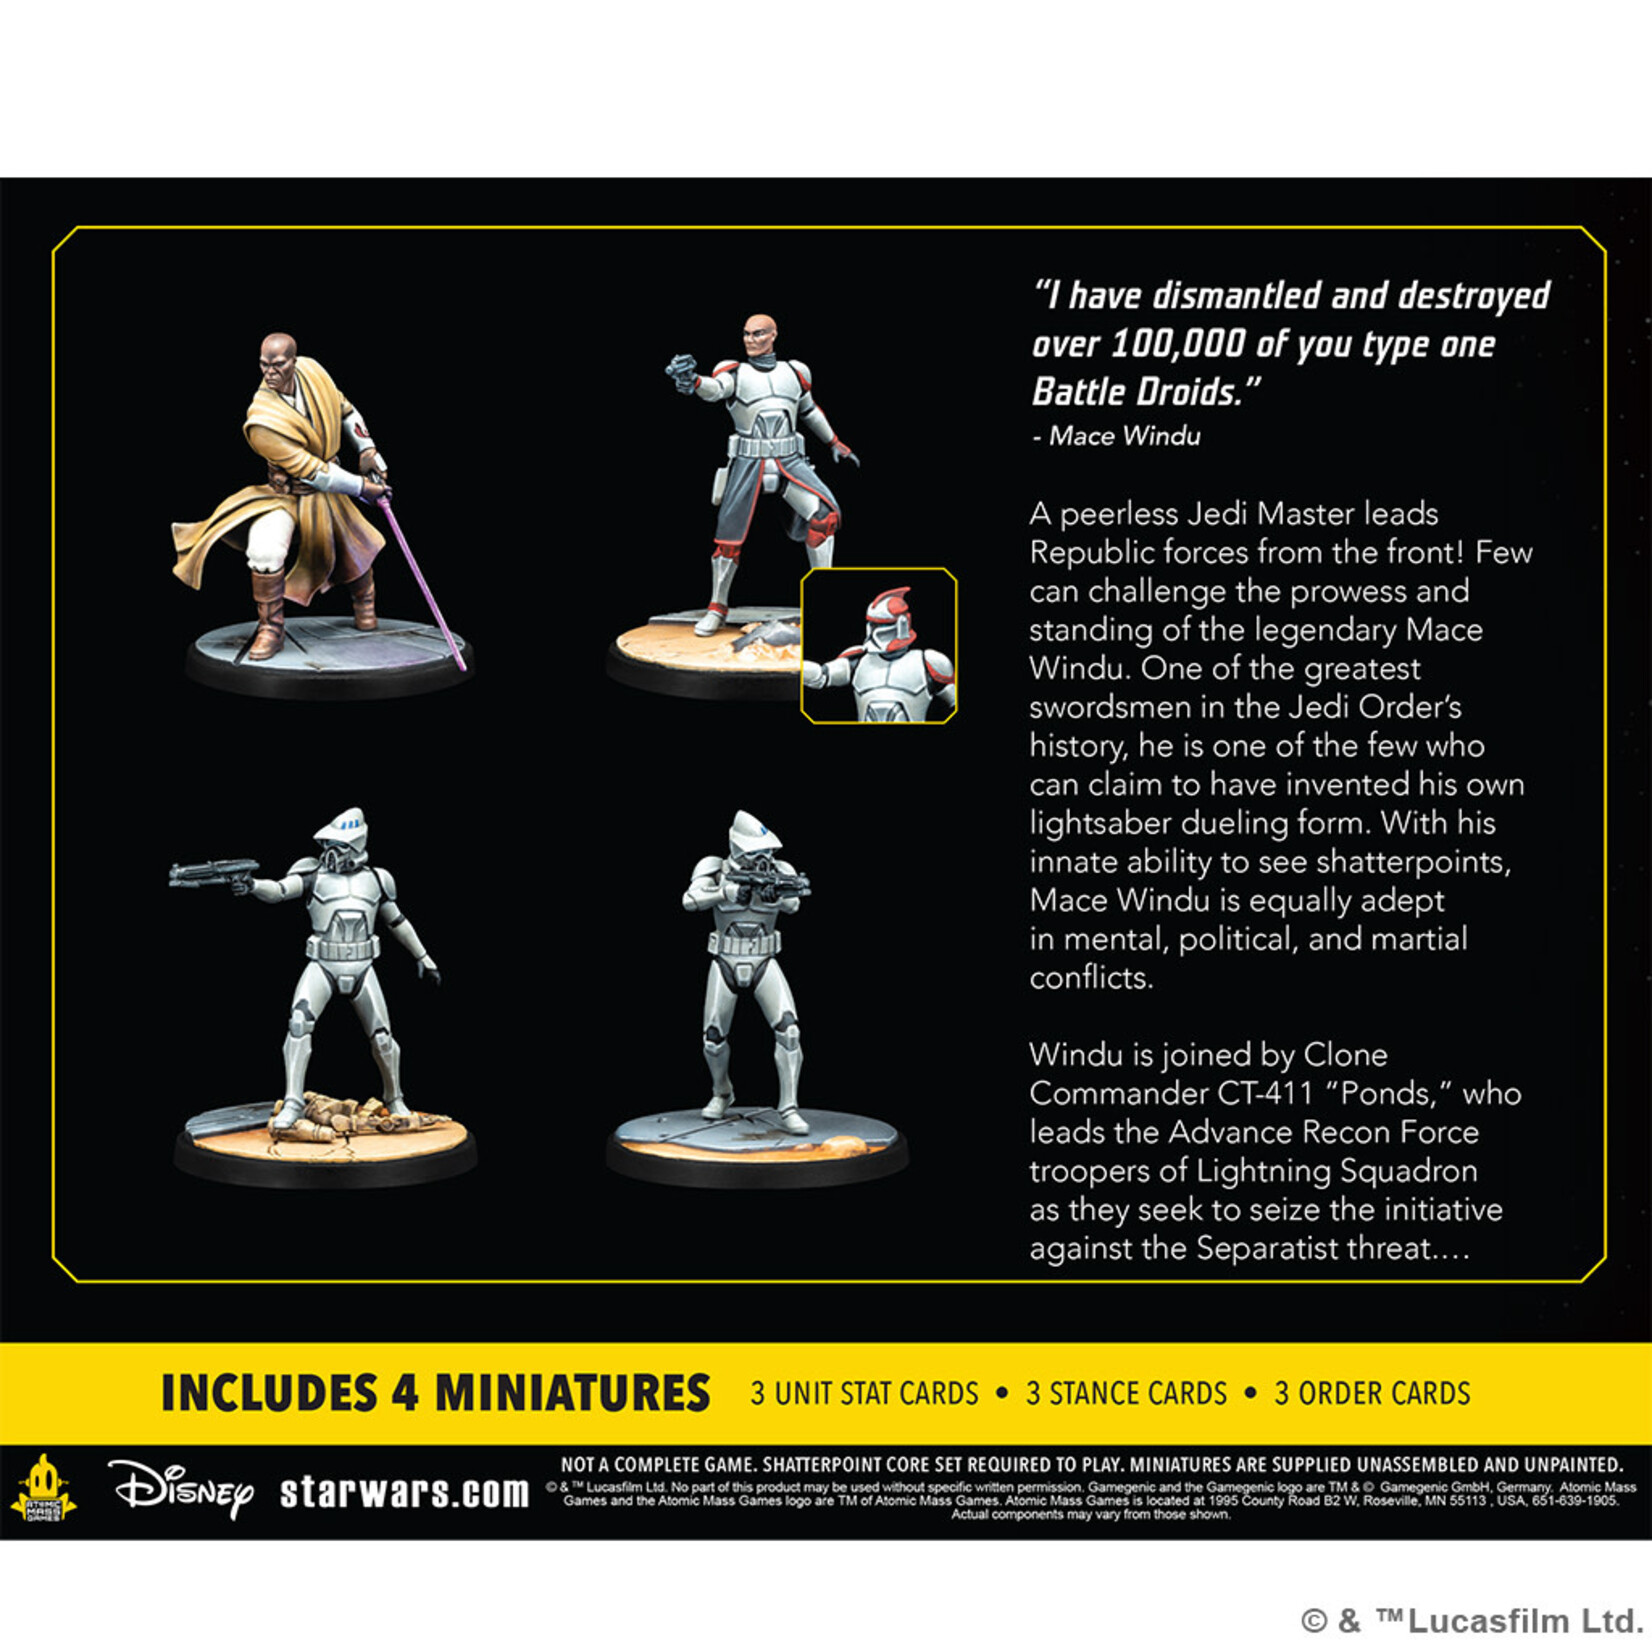 Atomic Mass Games Star Wars: Shatterpoint: This Party's Over Squad Pack